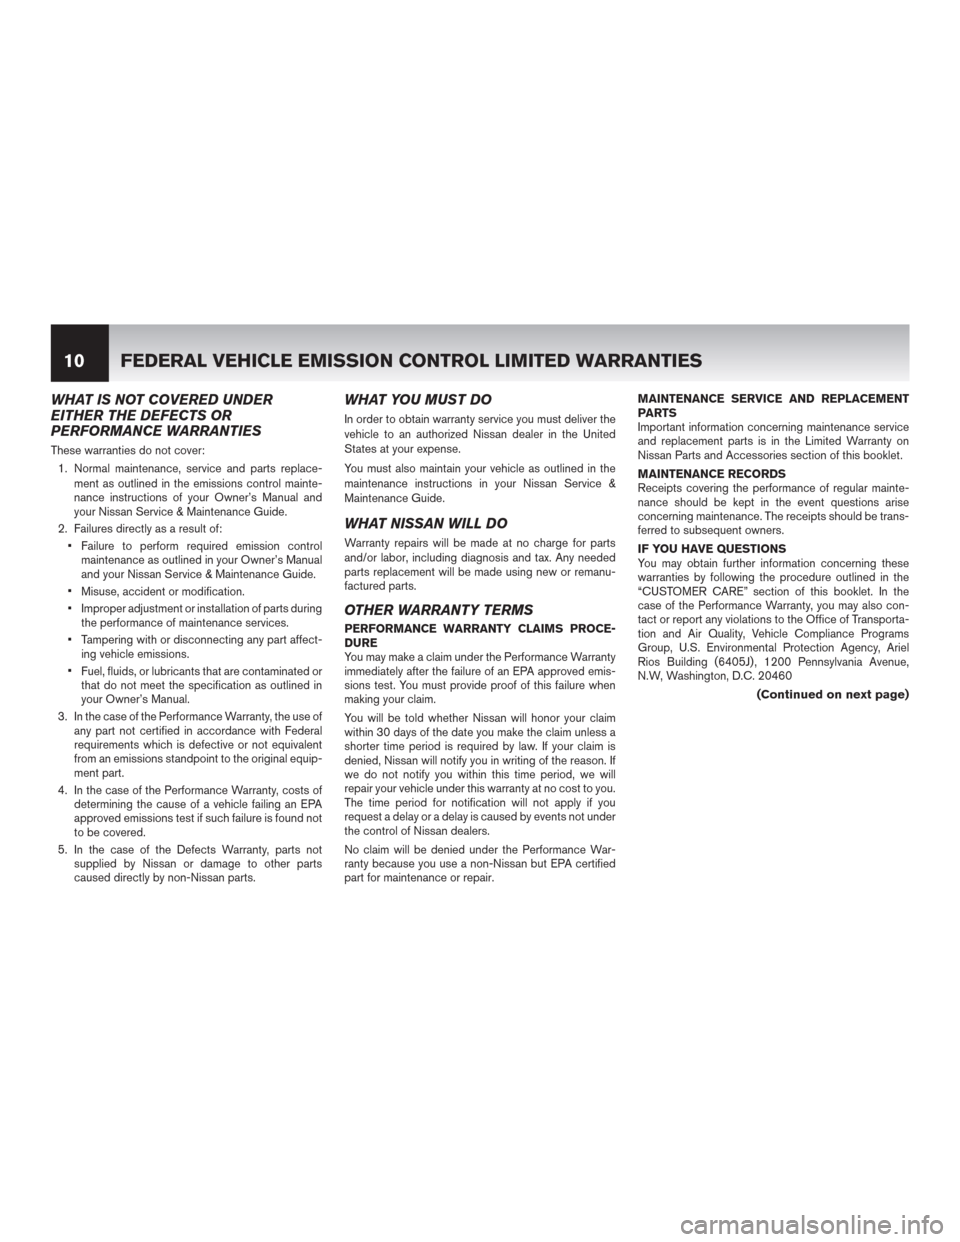 NISSAN ARMADA 2015 1.G Warranty Booklet WHAT IS NOT COVERED UNDER
EITHER THE DEFECTS OR
PERFORMANCE WARRANTIES
These warranties do not cover:
1. Normal maintenance, service and parts replace-
ment as outlined in the emissions control mainte